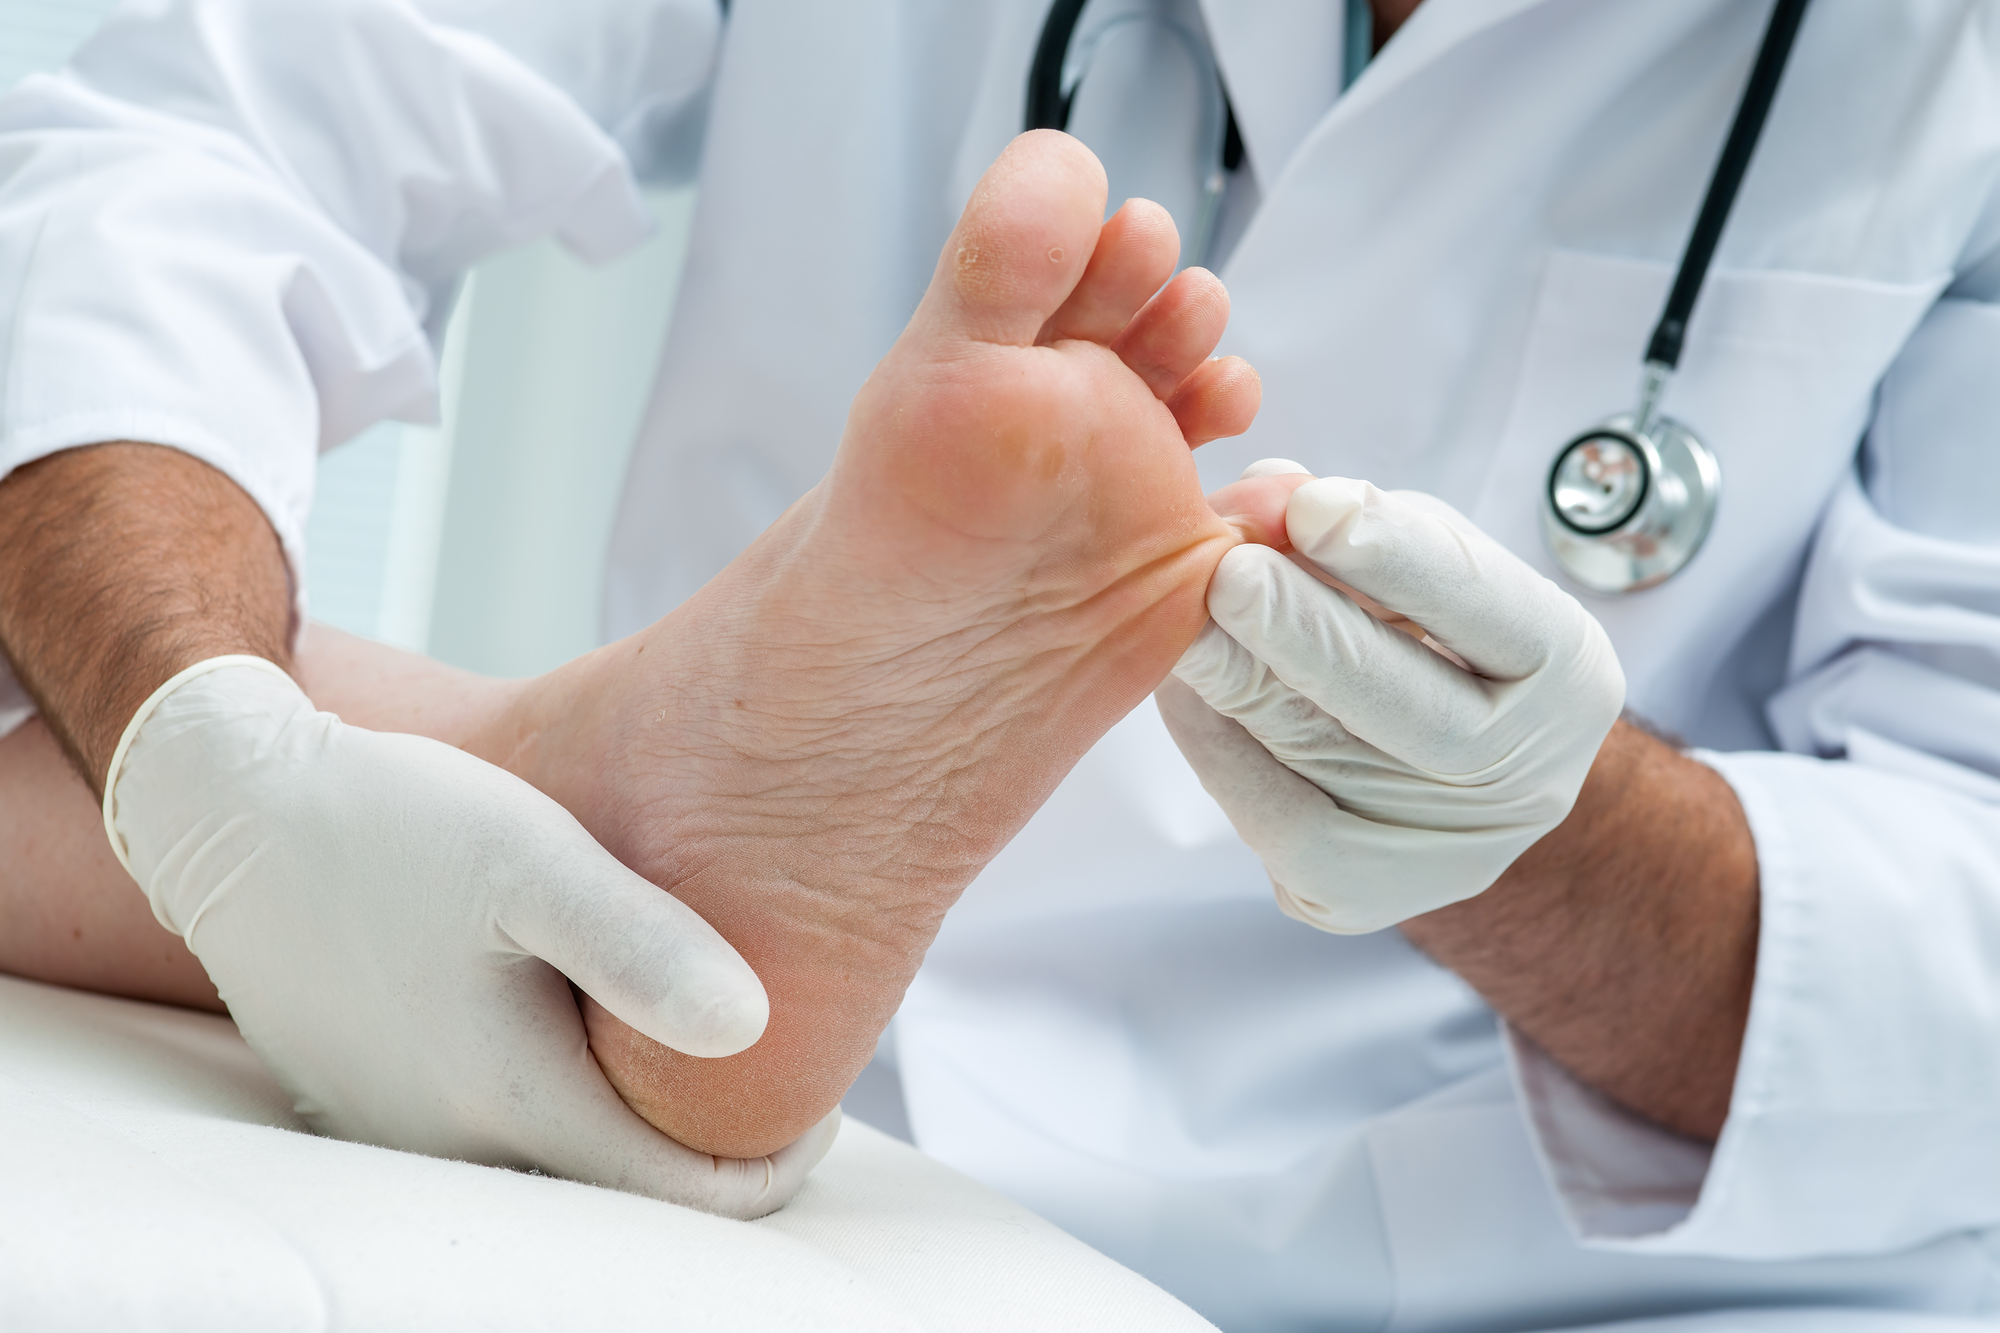 What is pain after bunion surgery like?